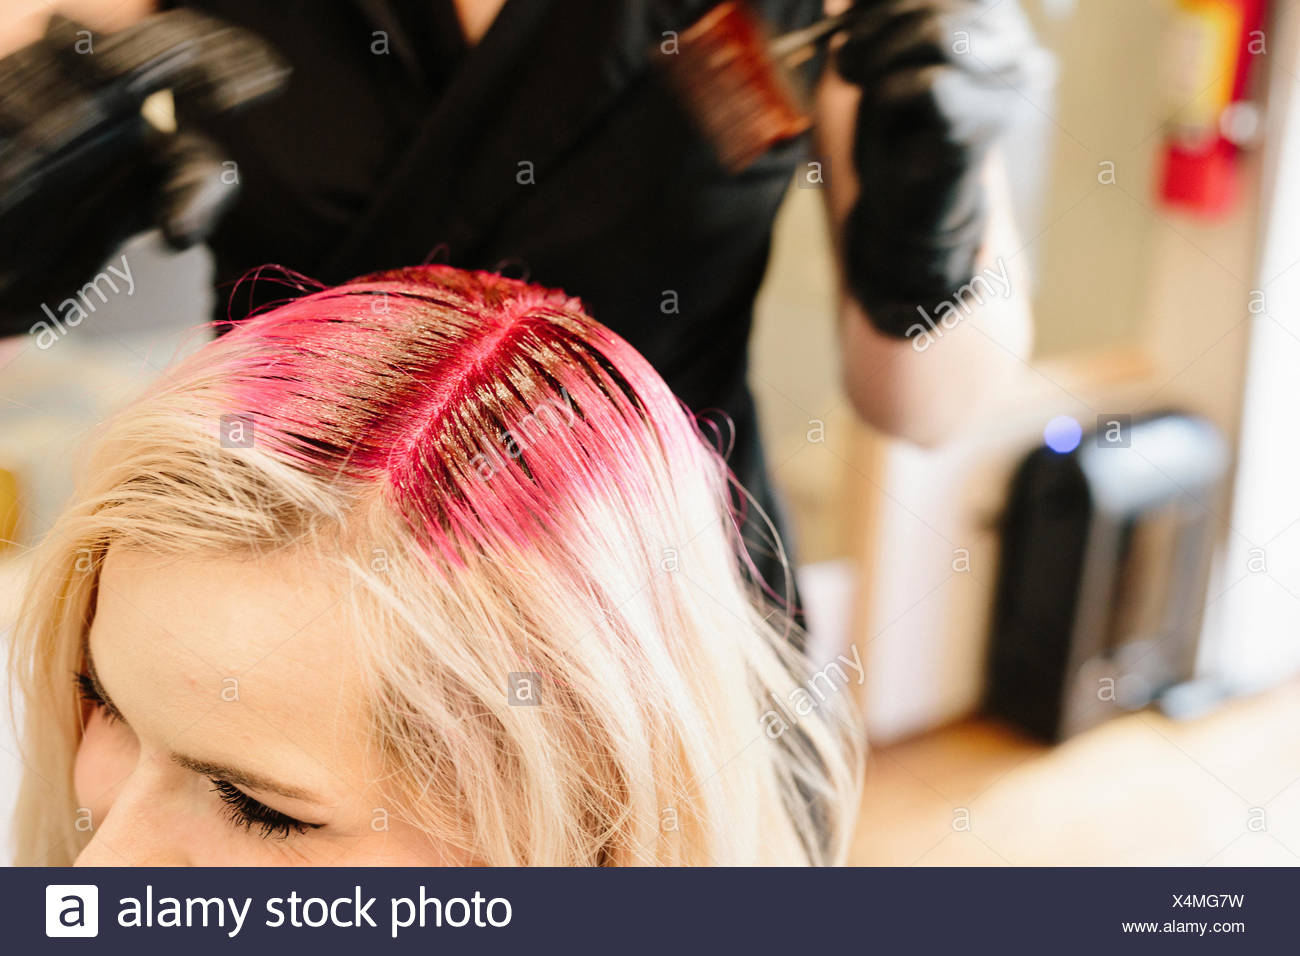 A Hair Colourist In Gloves Applying Red Hair Dye To A Client S